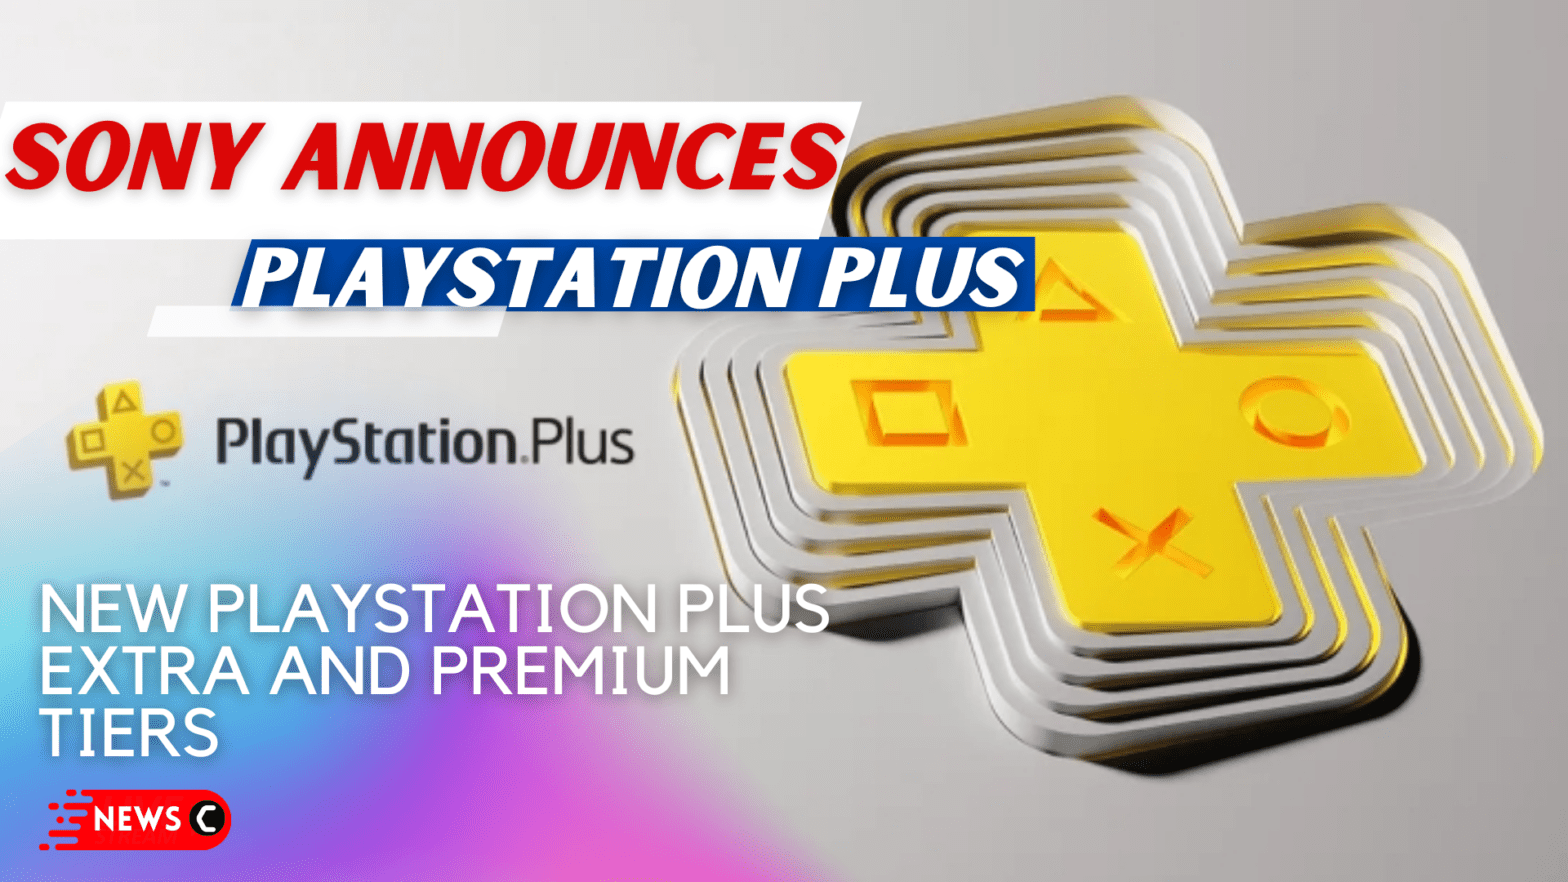 Sony Announces New PlayStation Plus Extra and Premium Tiers